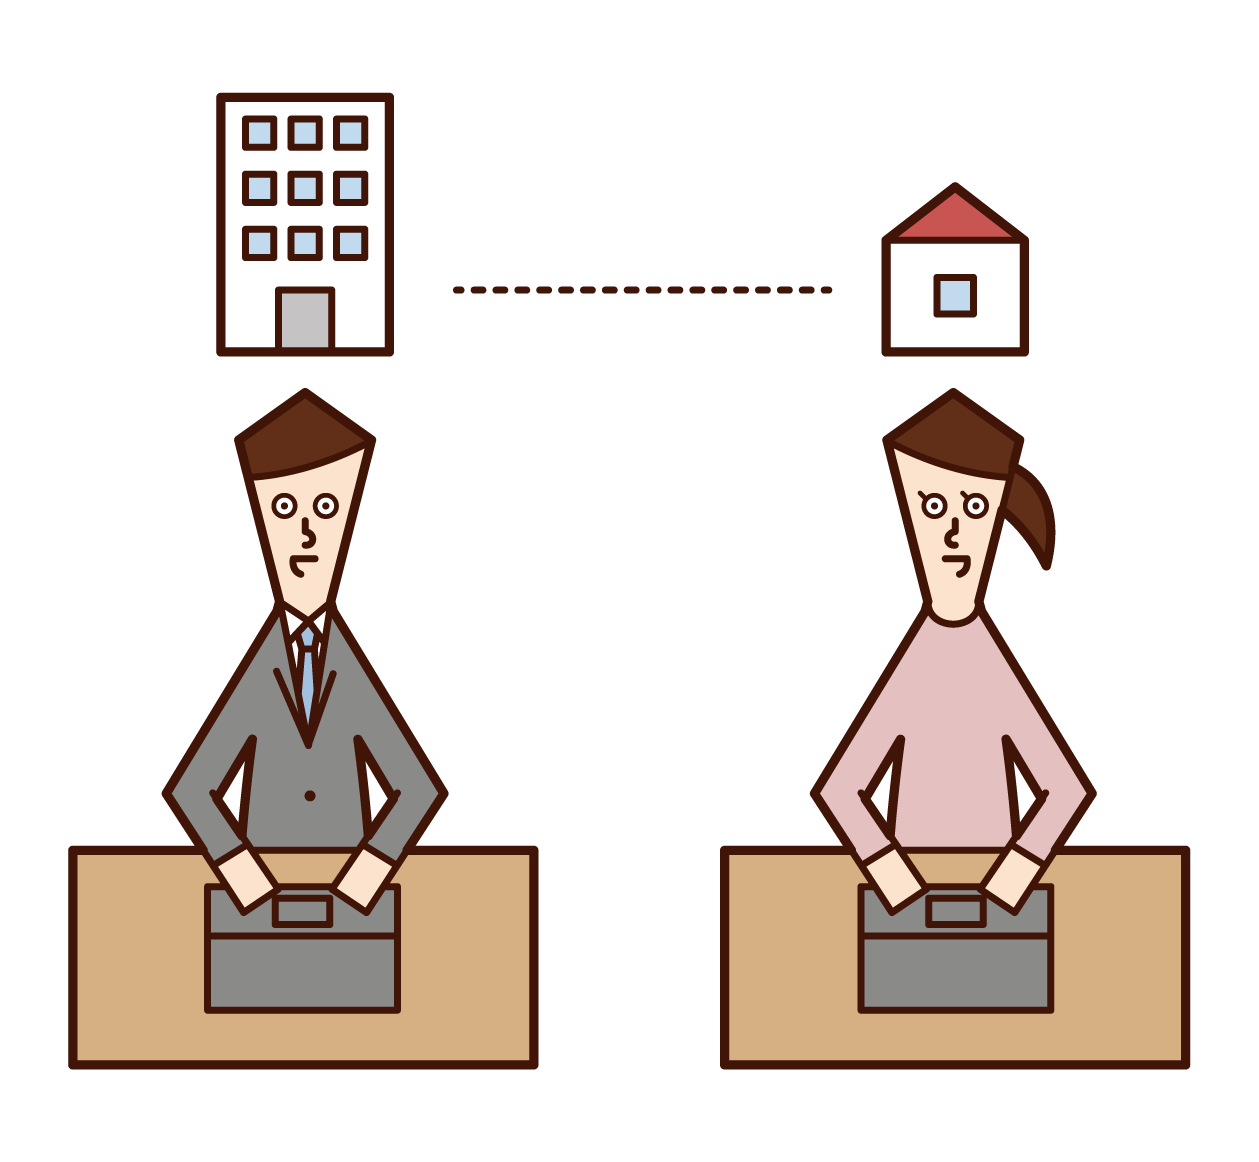 Illustration of a person (female) who works telework or remote work